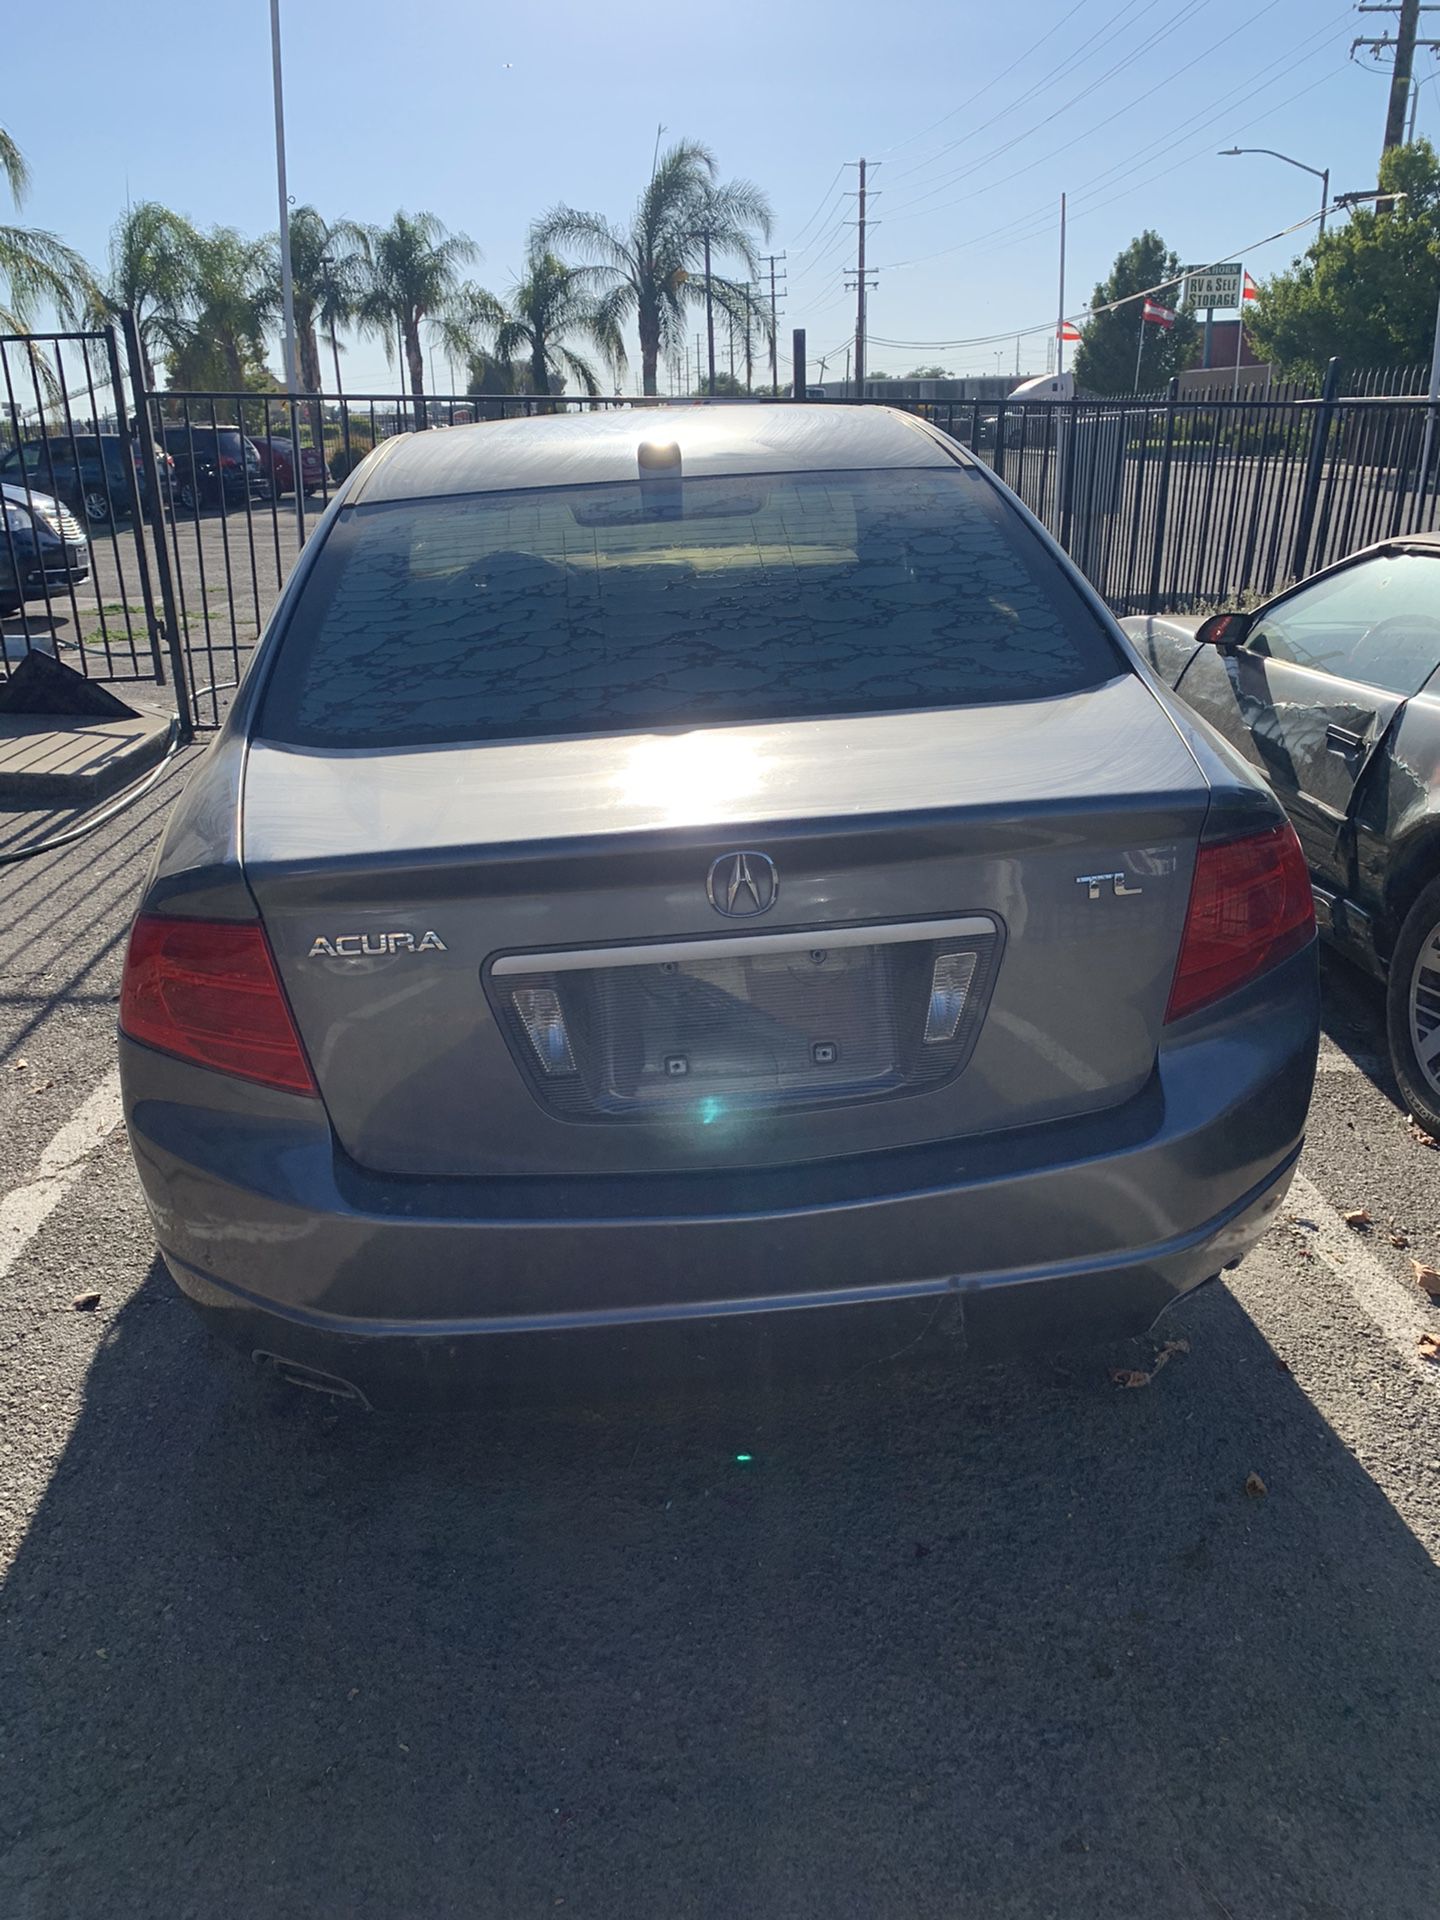 2006 Acura selling by parts